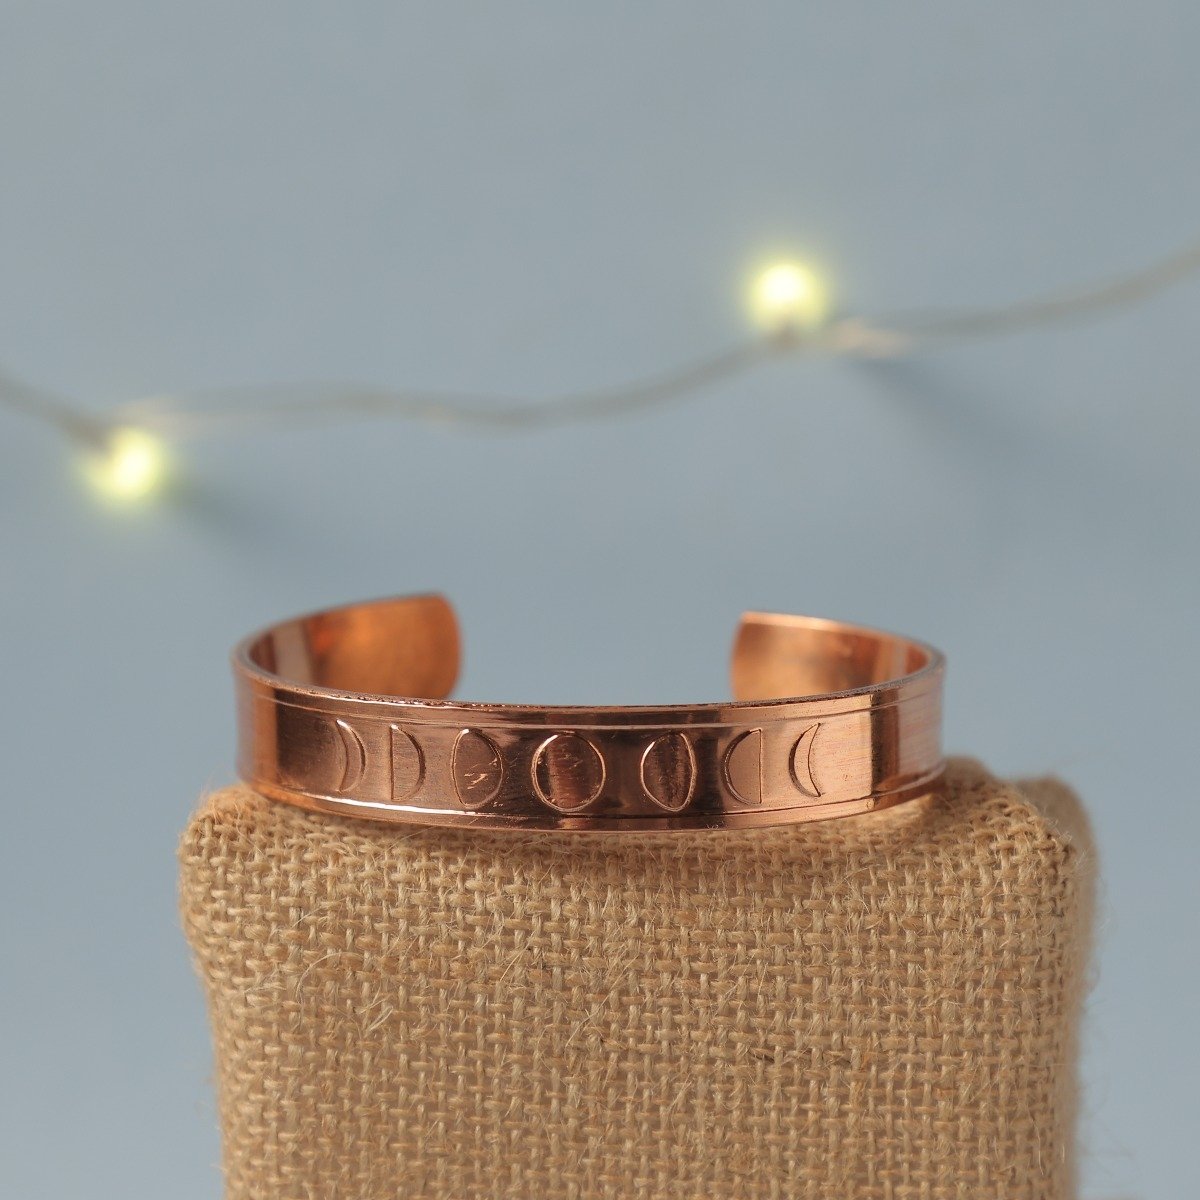 Buy pure Noe Copper Bracelet Free size unisex for best price at  magizhcopper.com